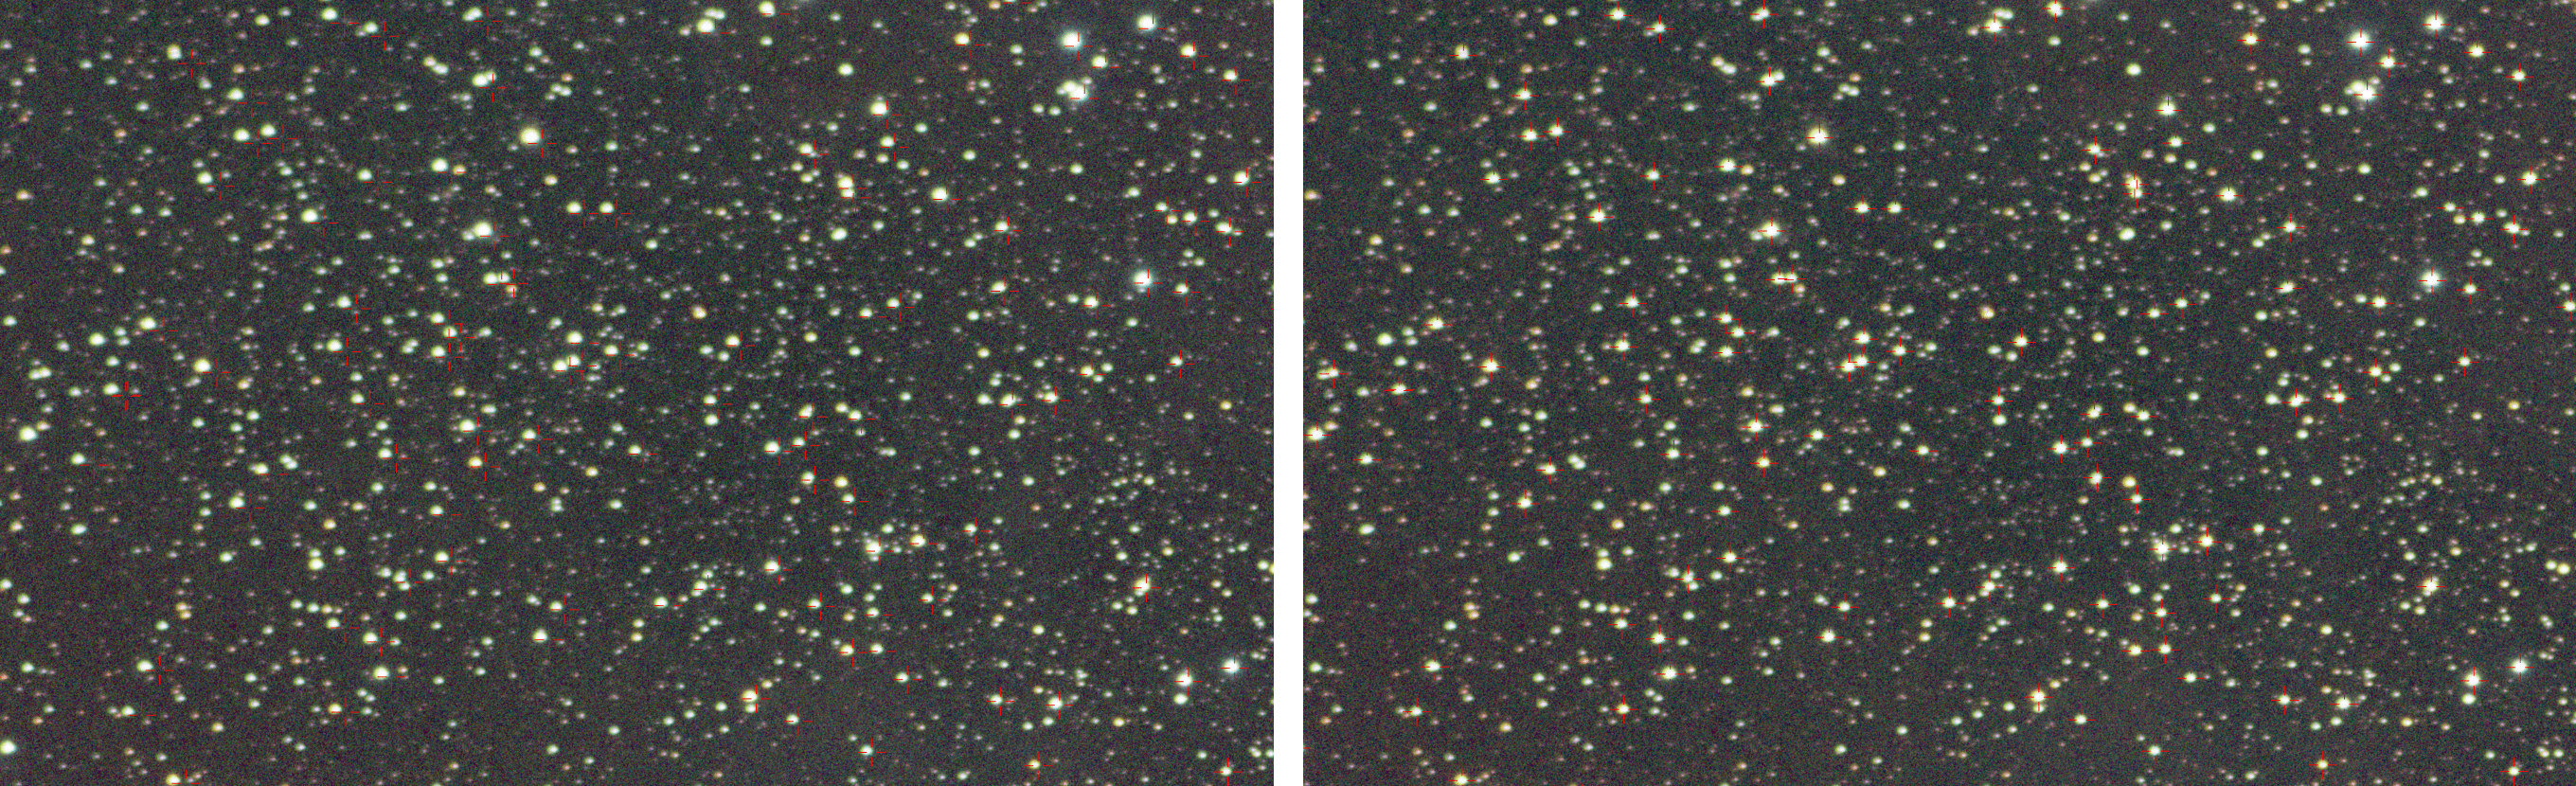 Comparison of linear plate solving on the left and cubic plate solving on the right. You can see that the stars in the catalog (red crosses) are pointed very precisely (click to enlarge).